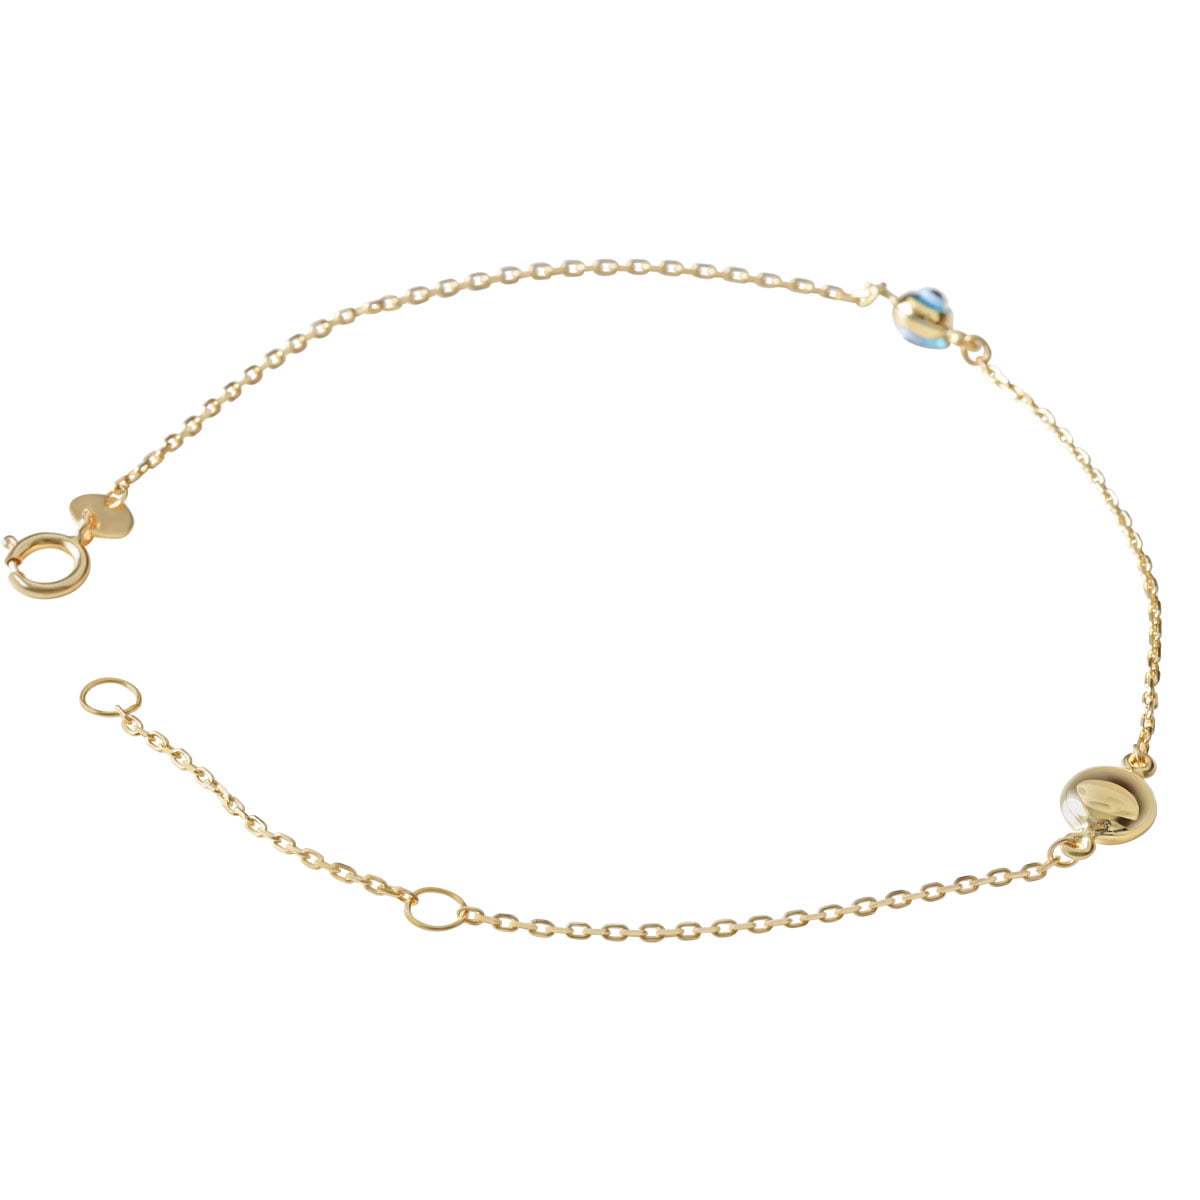 Gold Turquoise Bracelet in 18ct solid gold